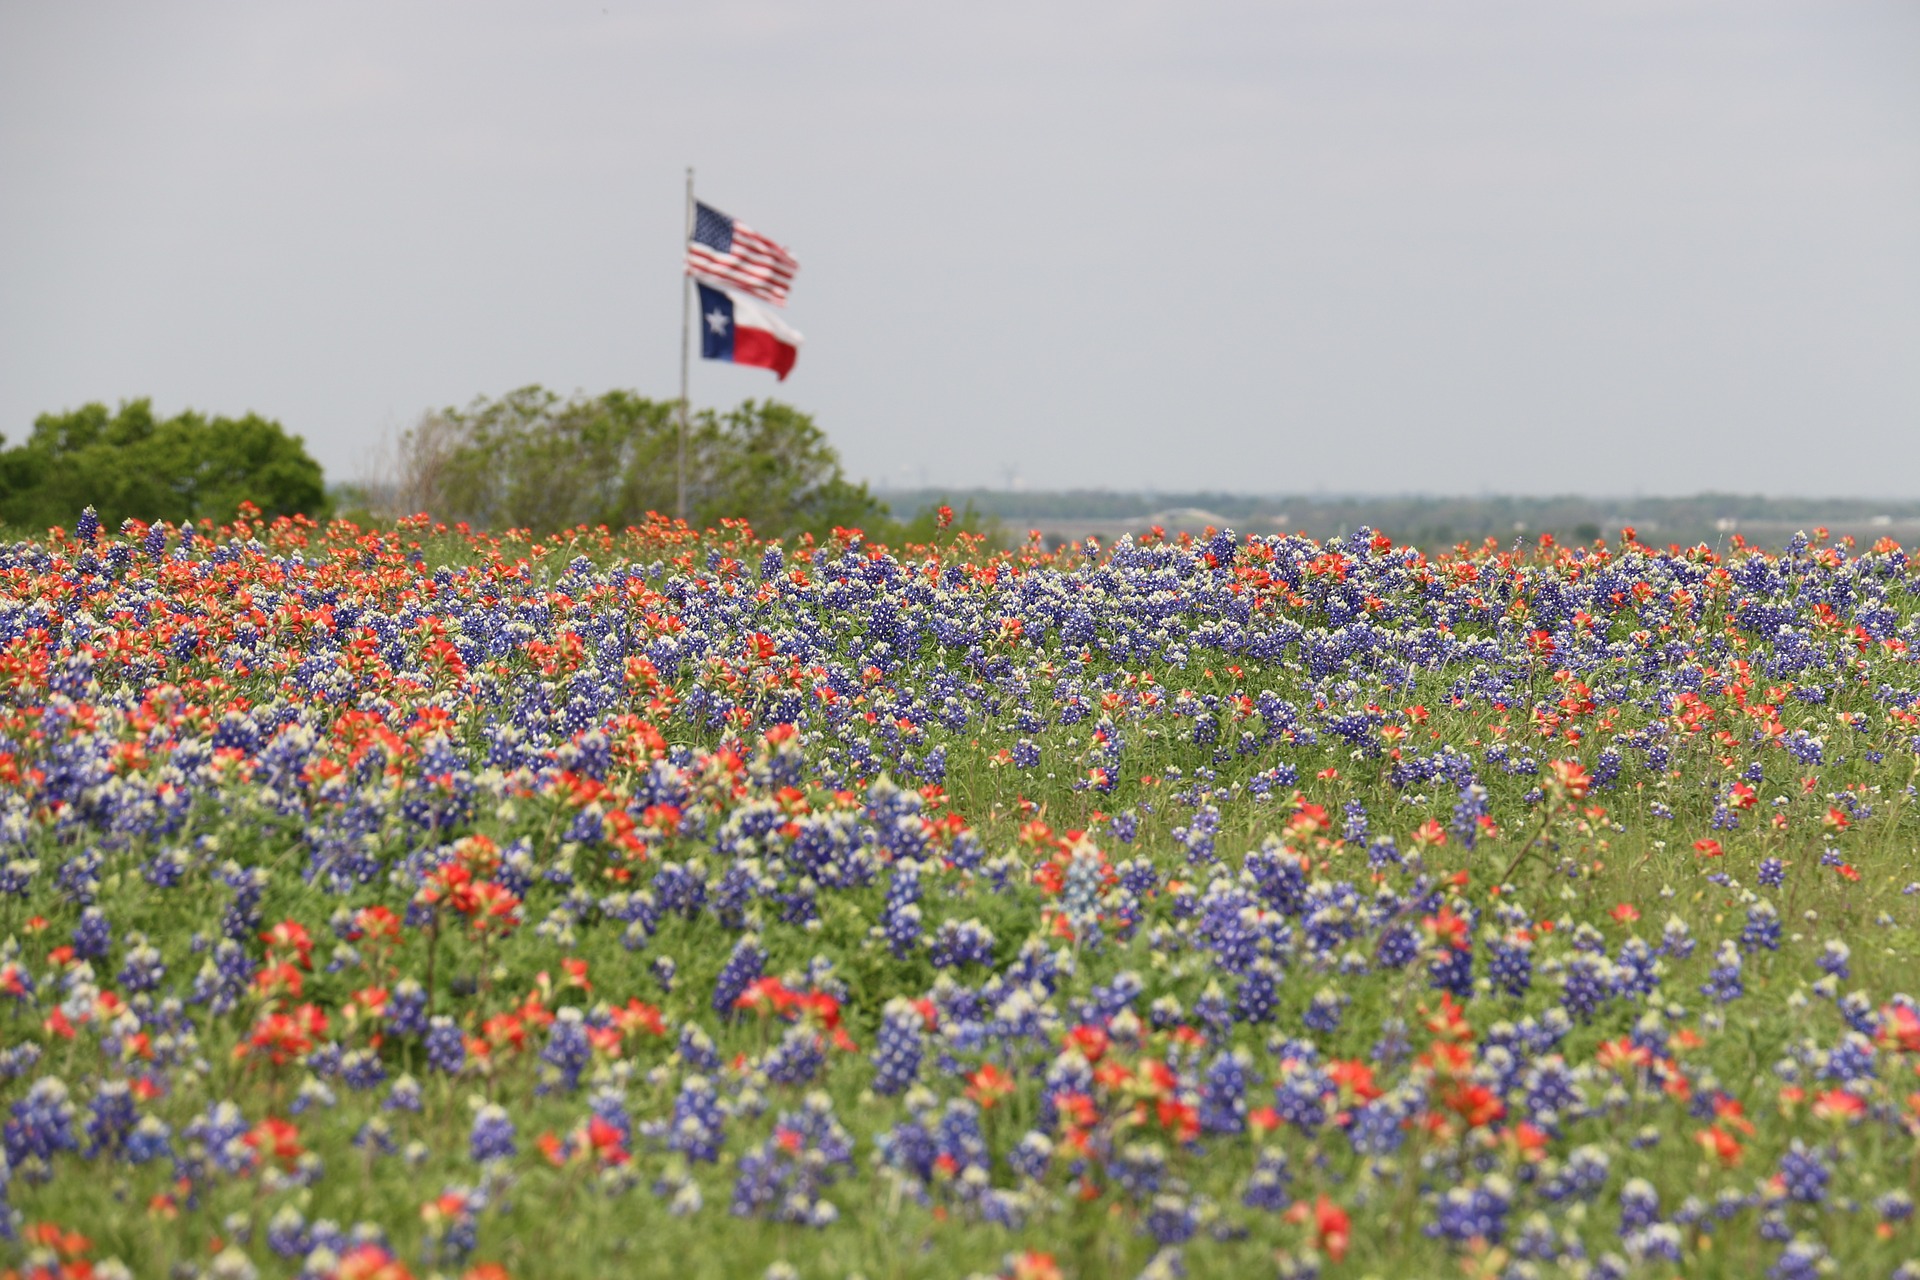 1631120502-Area-Code-469-TX-Generic-Flowers-and-Flags